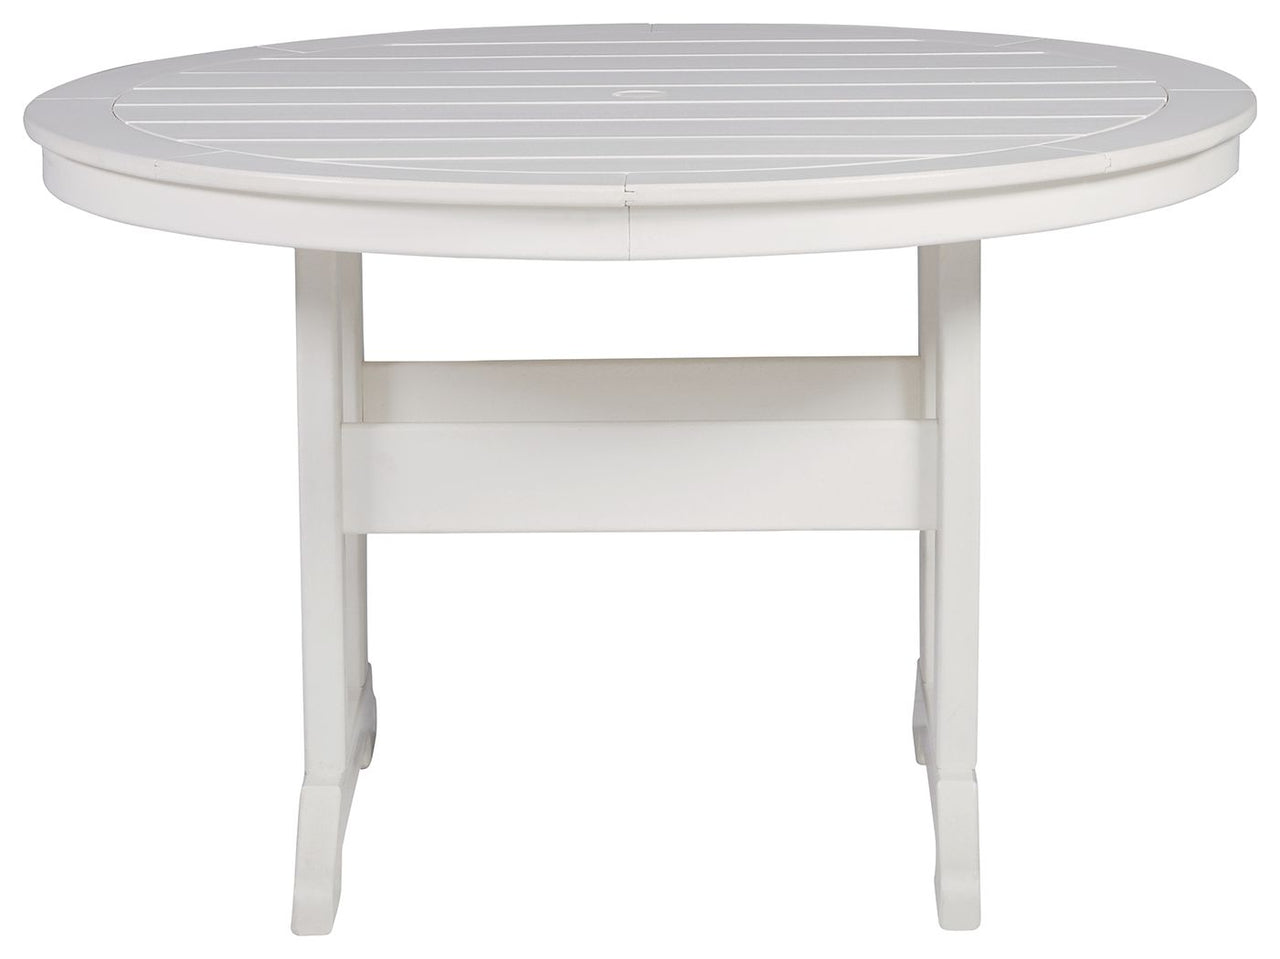 Crescent Luxe - White - Round Dining Table W/Umb Opt - Tony's Home Furnishings